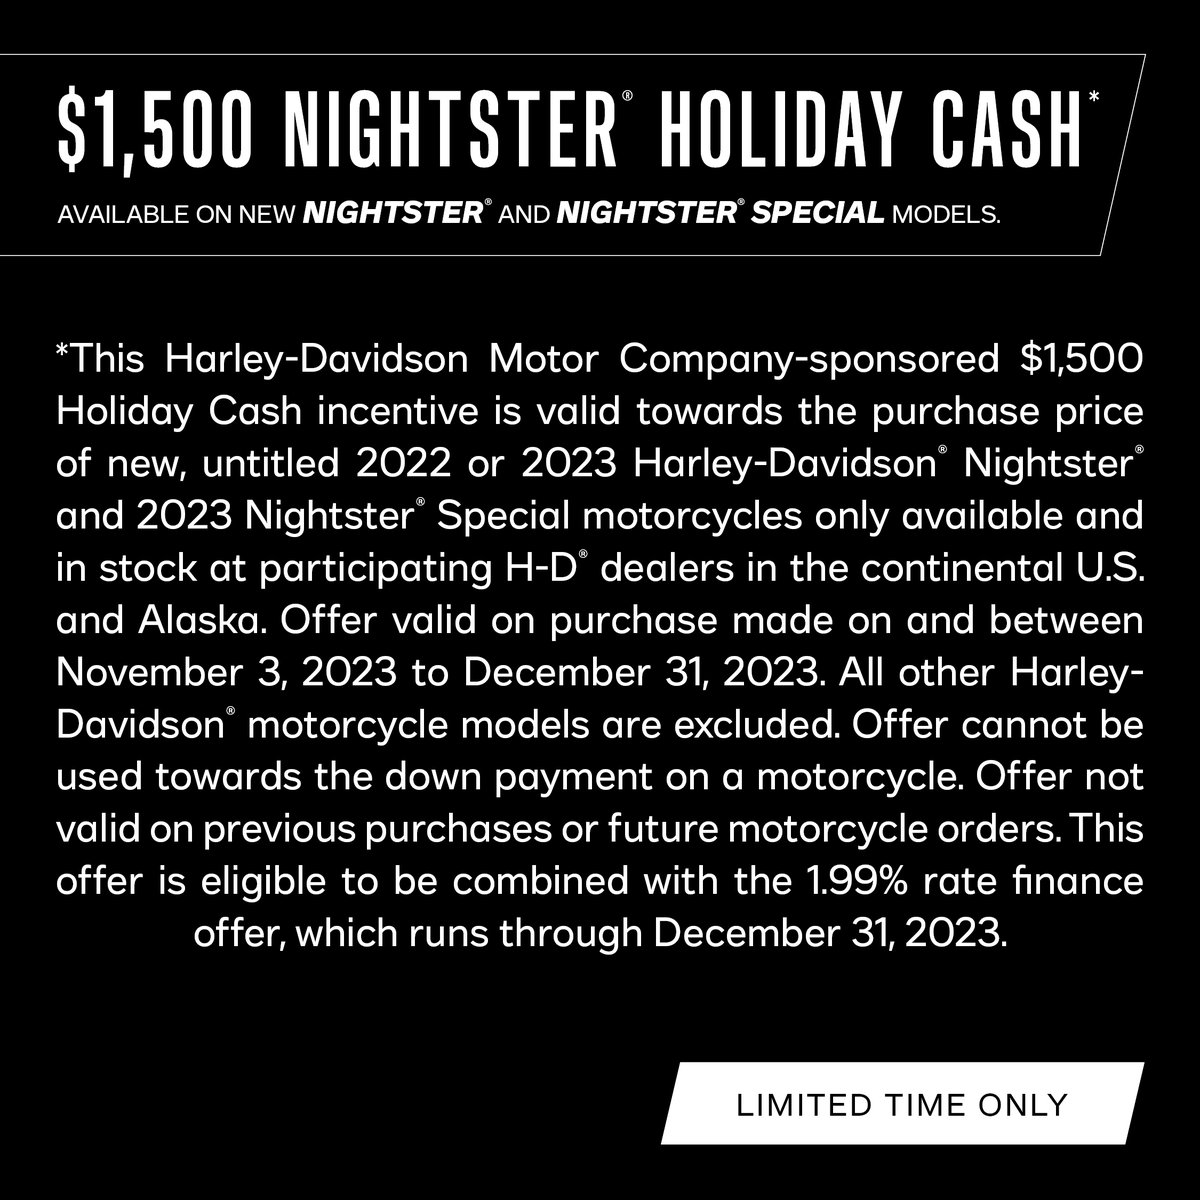 Limited Time only. $1,500 Holiday Cash on Nightster and Nightster Special.

www.blacksheephd,com

#blacksheepharleydavidson #harleydavidson #Nightster #nightsterspecial #Holidays #cash